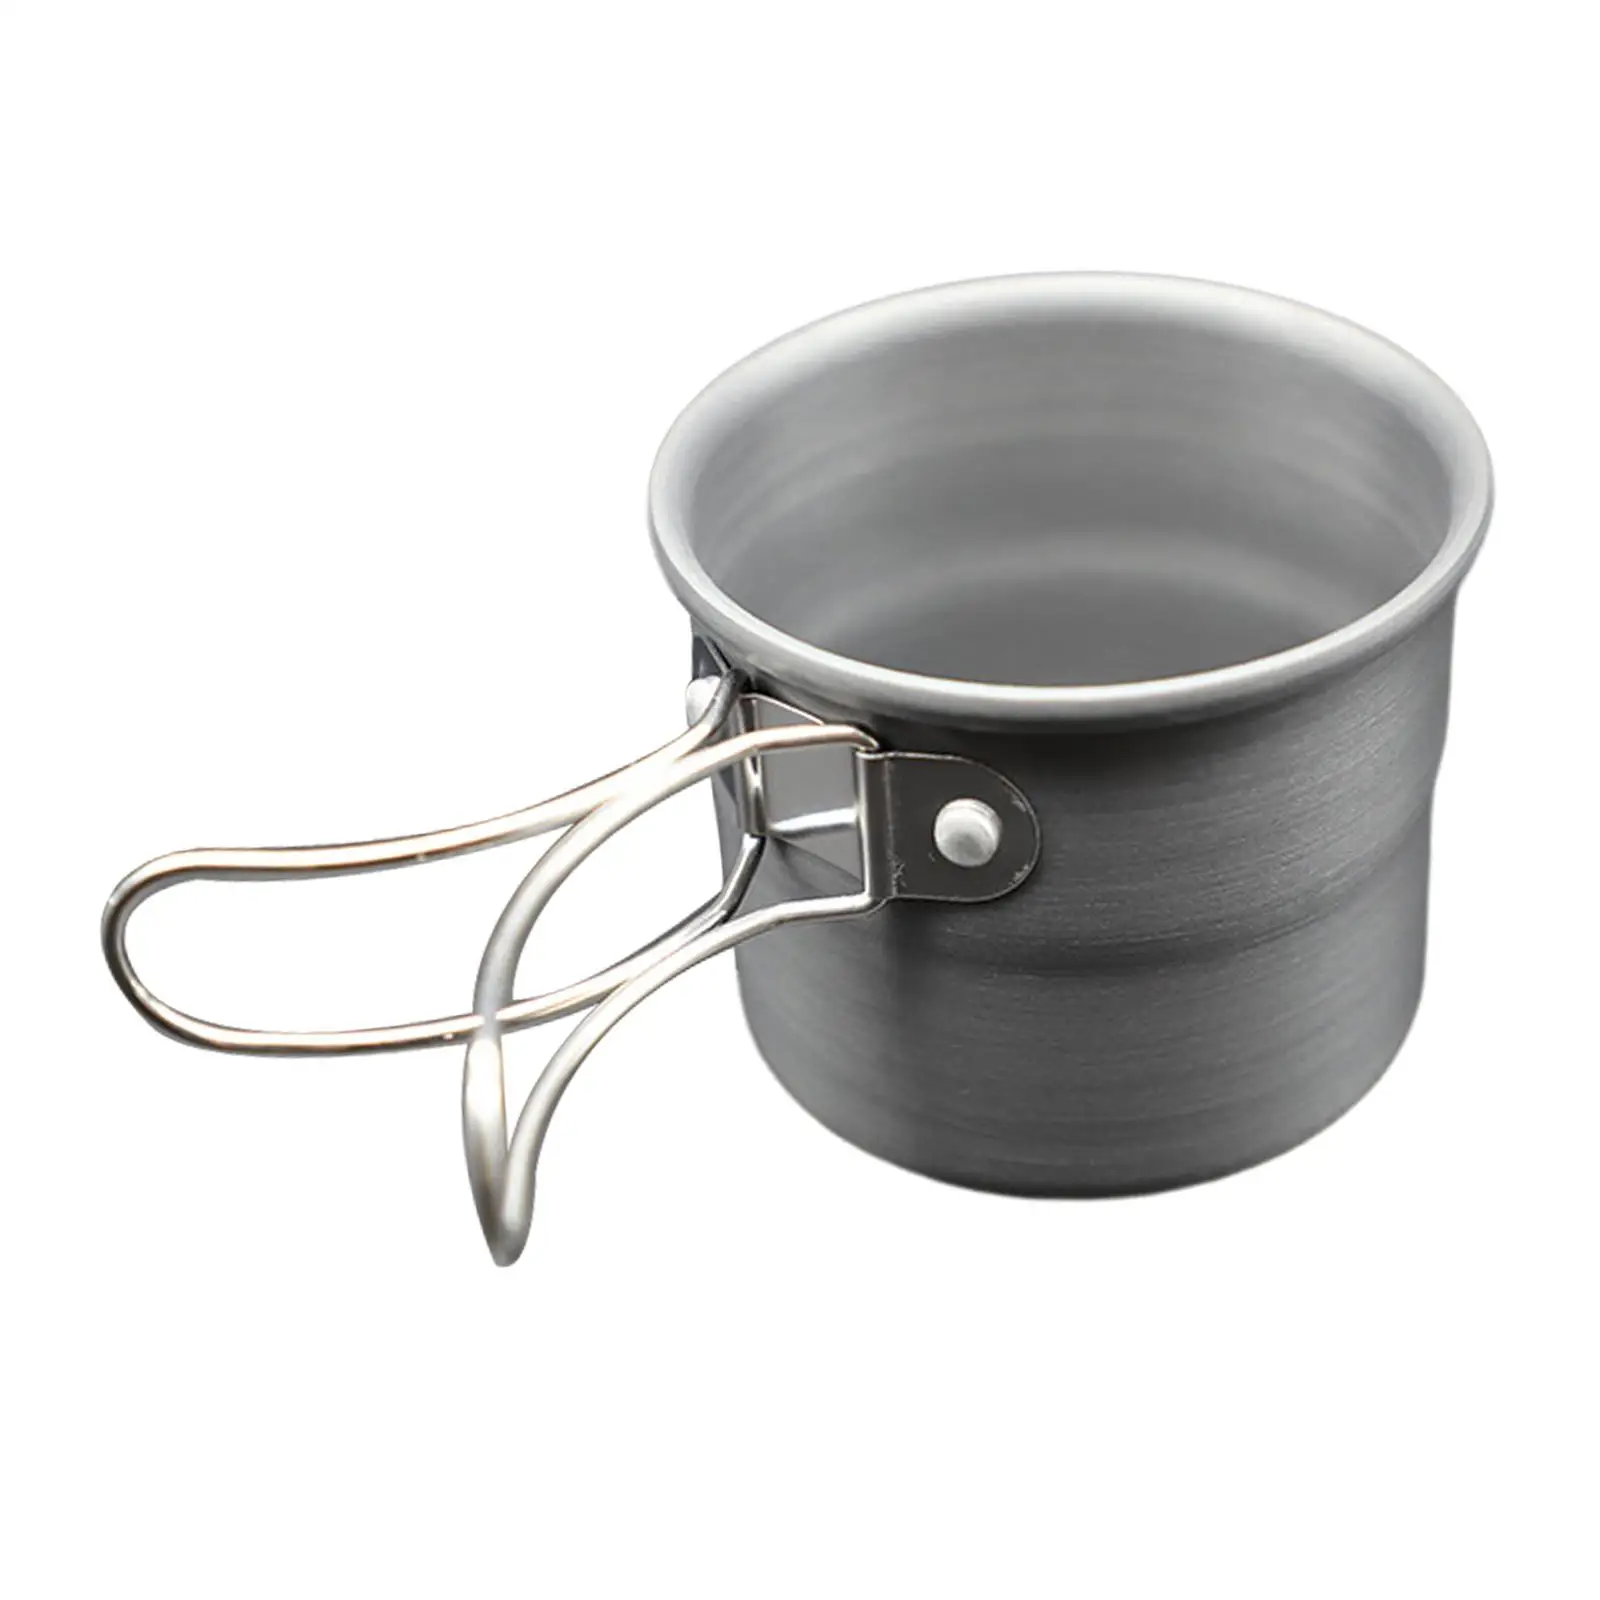 Camping Cup Mug Drinkware Aluminum Alloy Small with Foldable Handles Pot for Touring Trips Hiking Cooking Outdoor Backpacking